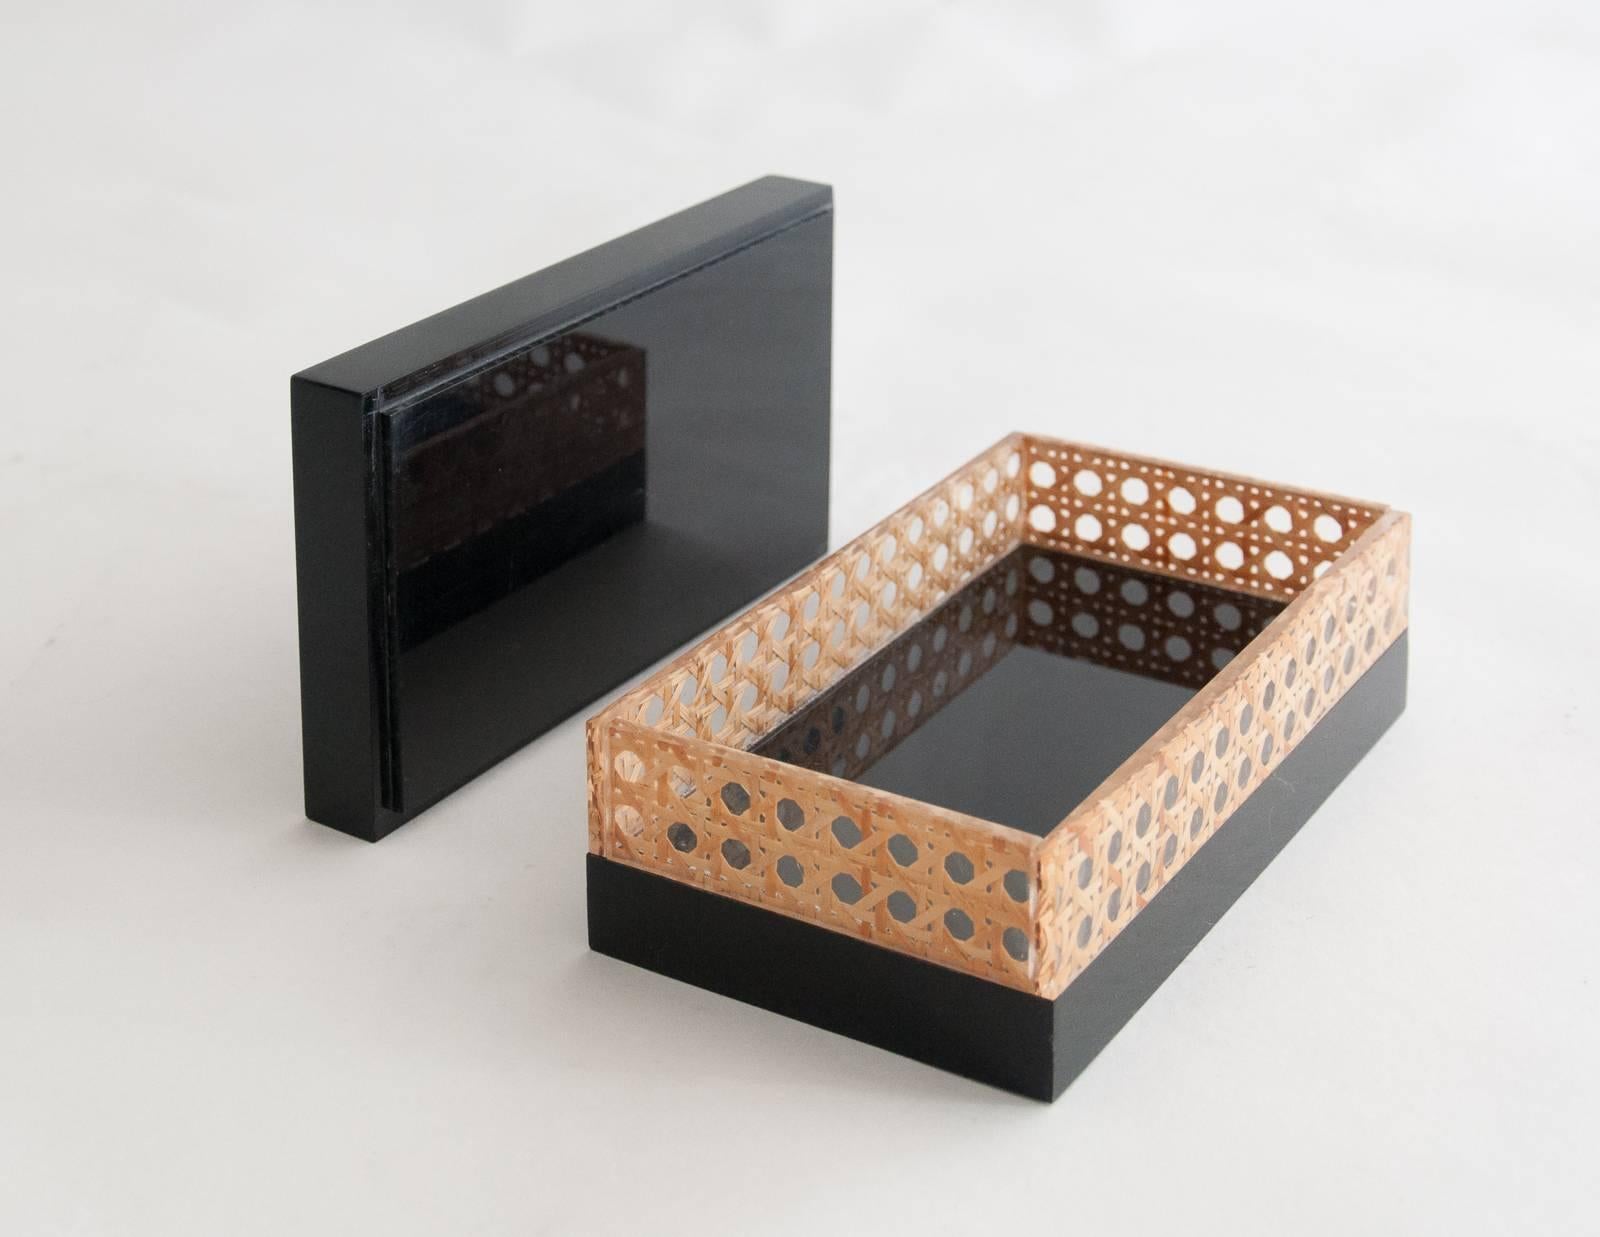 Midcentury black Lucite and embedded cane work decorative box attributed to Christian Dior Home Collection in 1970s. Rectangular shape with rattan canework embedded in clear Lucite.
Probably made in Italy for the French market.